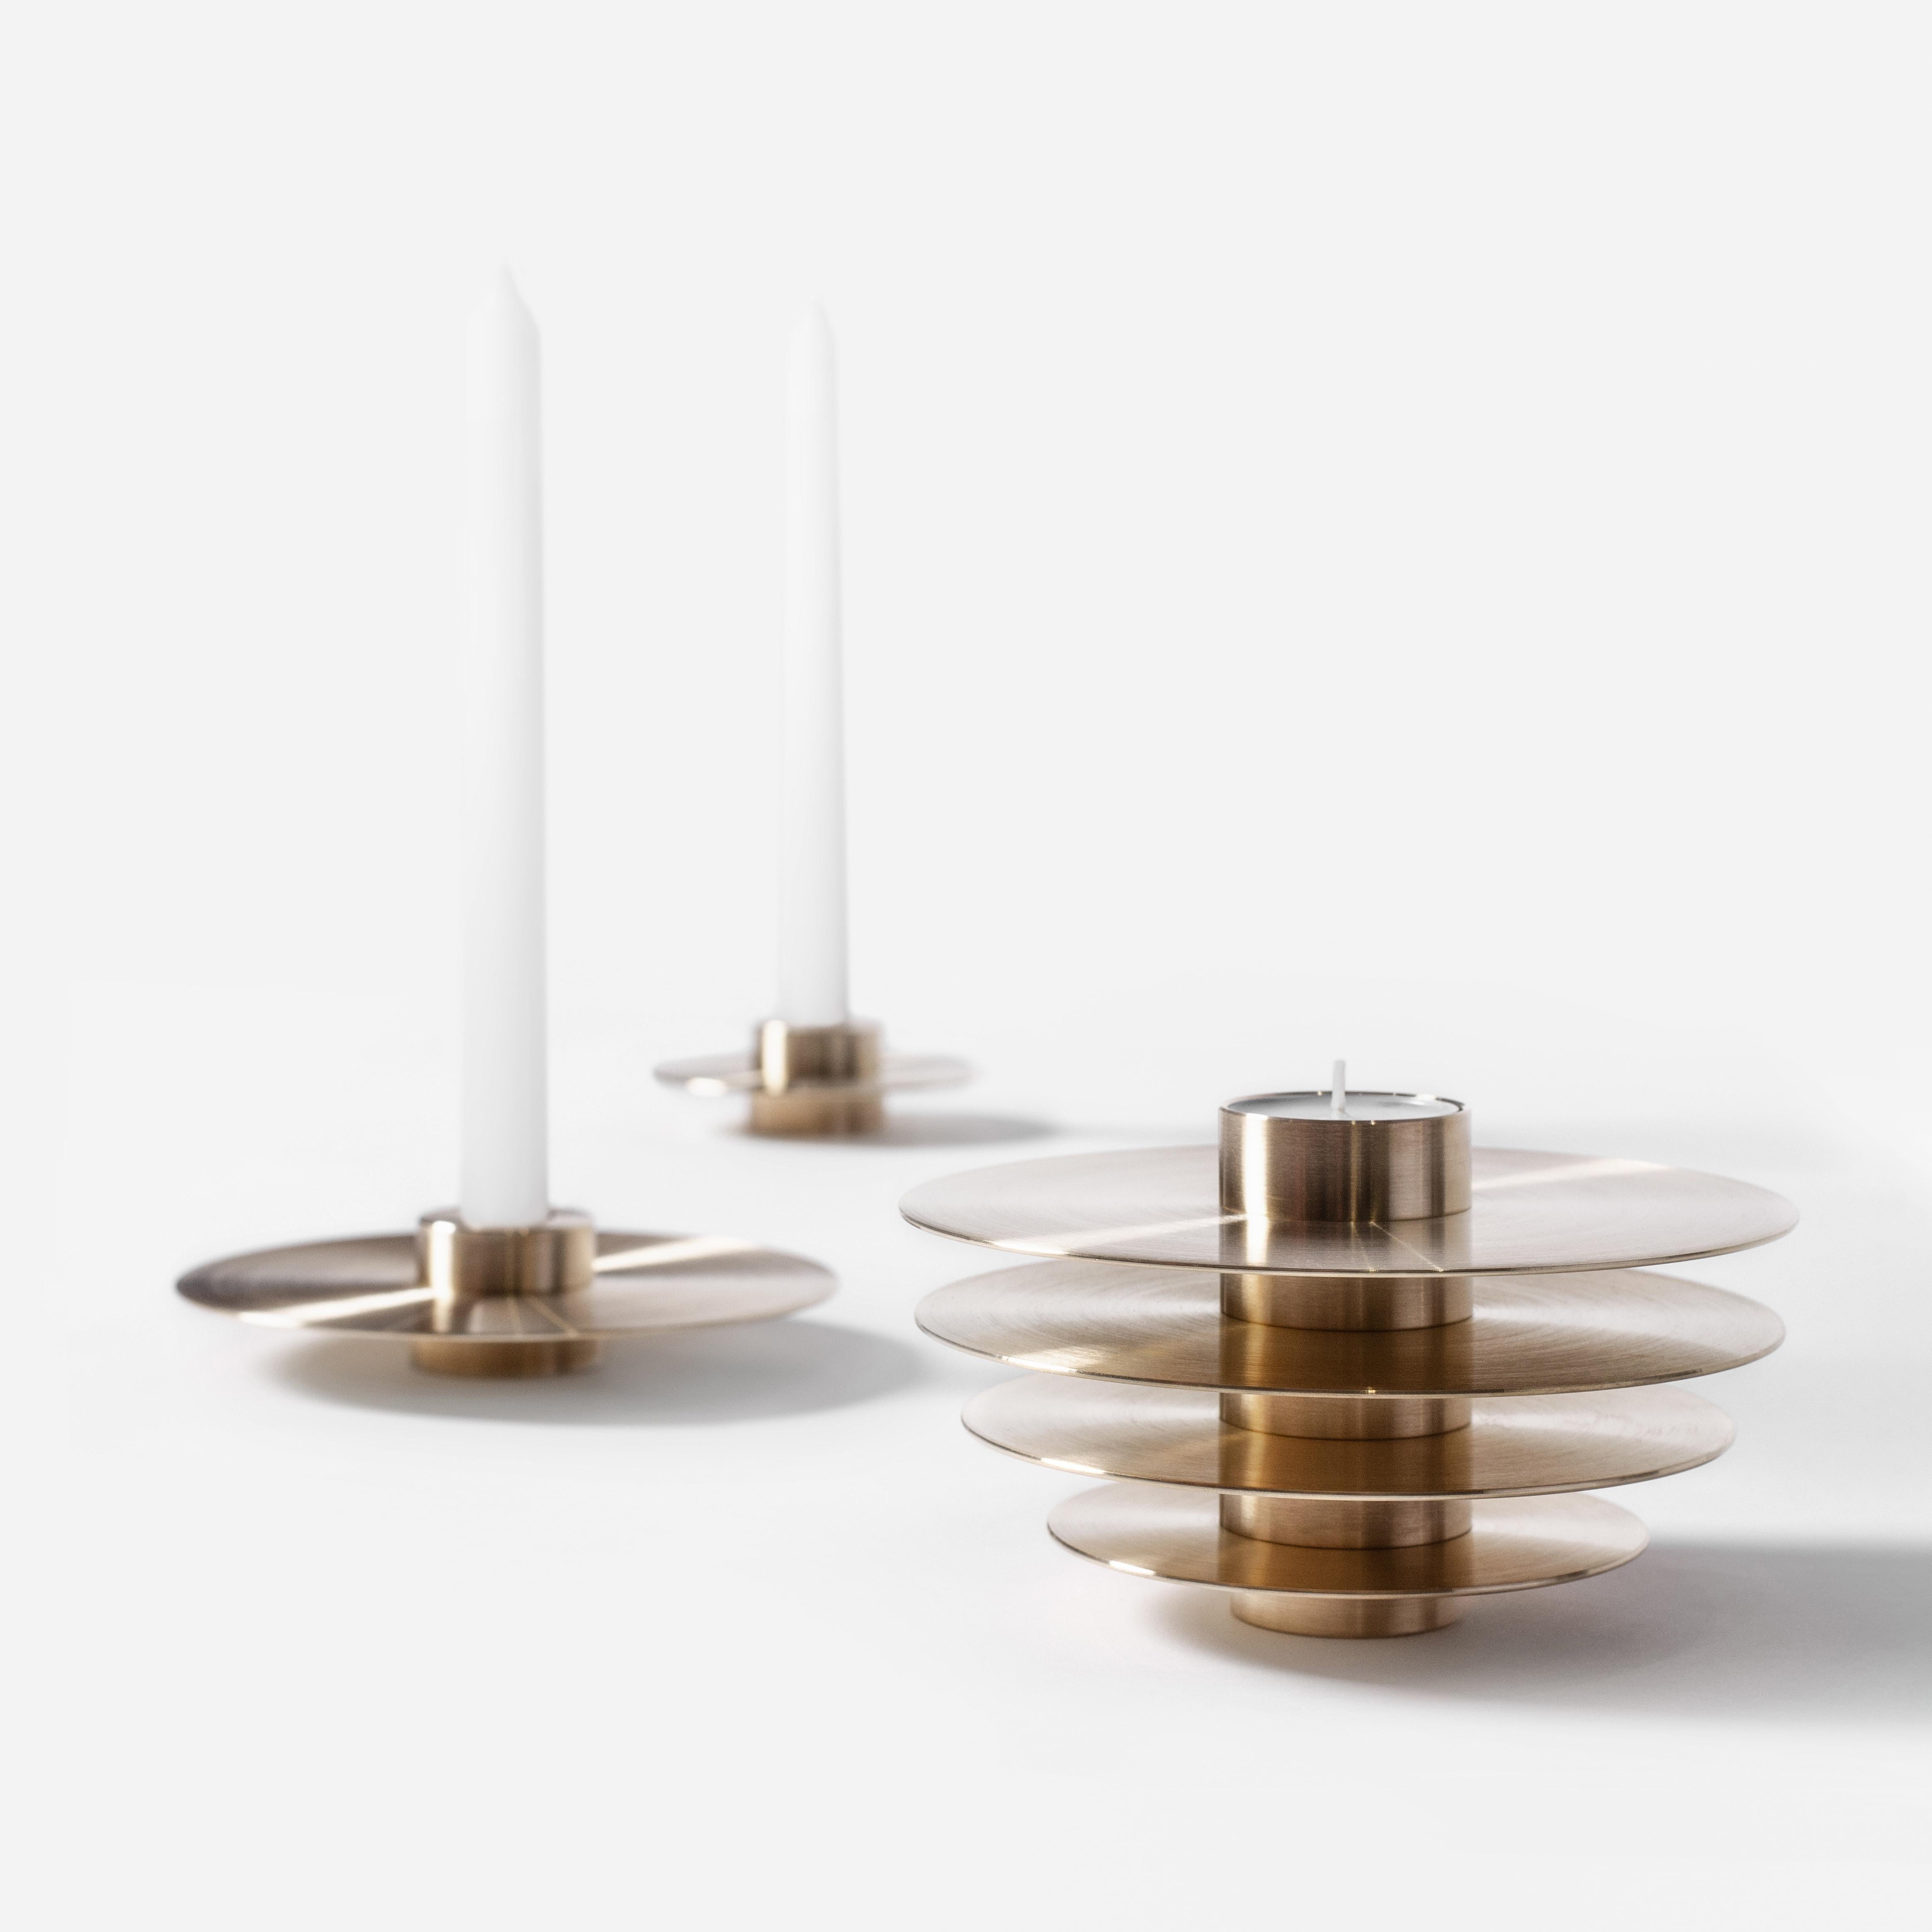 ORB Candleholders Set 
Designer: Kateryna Sokolova
Materials: Solid brass
Dimensions: Ø 15 cm
Net Weight: 2,5 kg

Candle holders set of 7 Materials: Solid brass

The geometric sphere at all times has been a symbol of integrity and harmony. Spherical